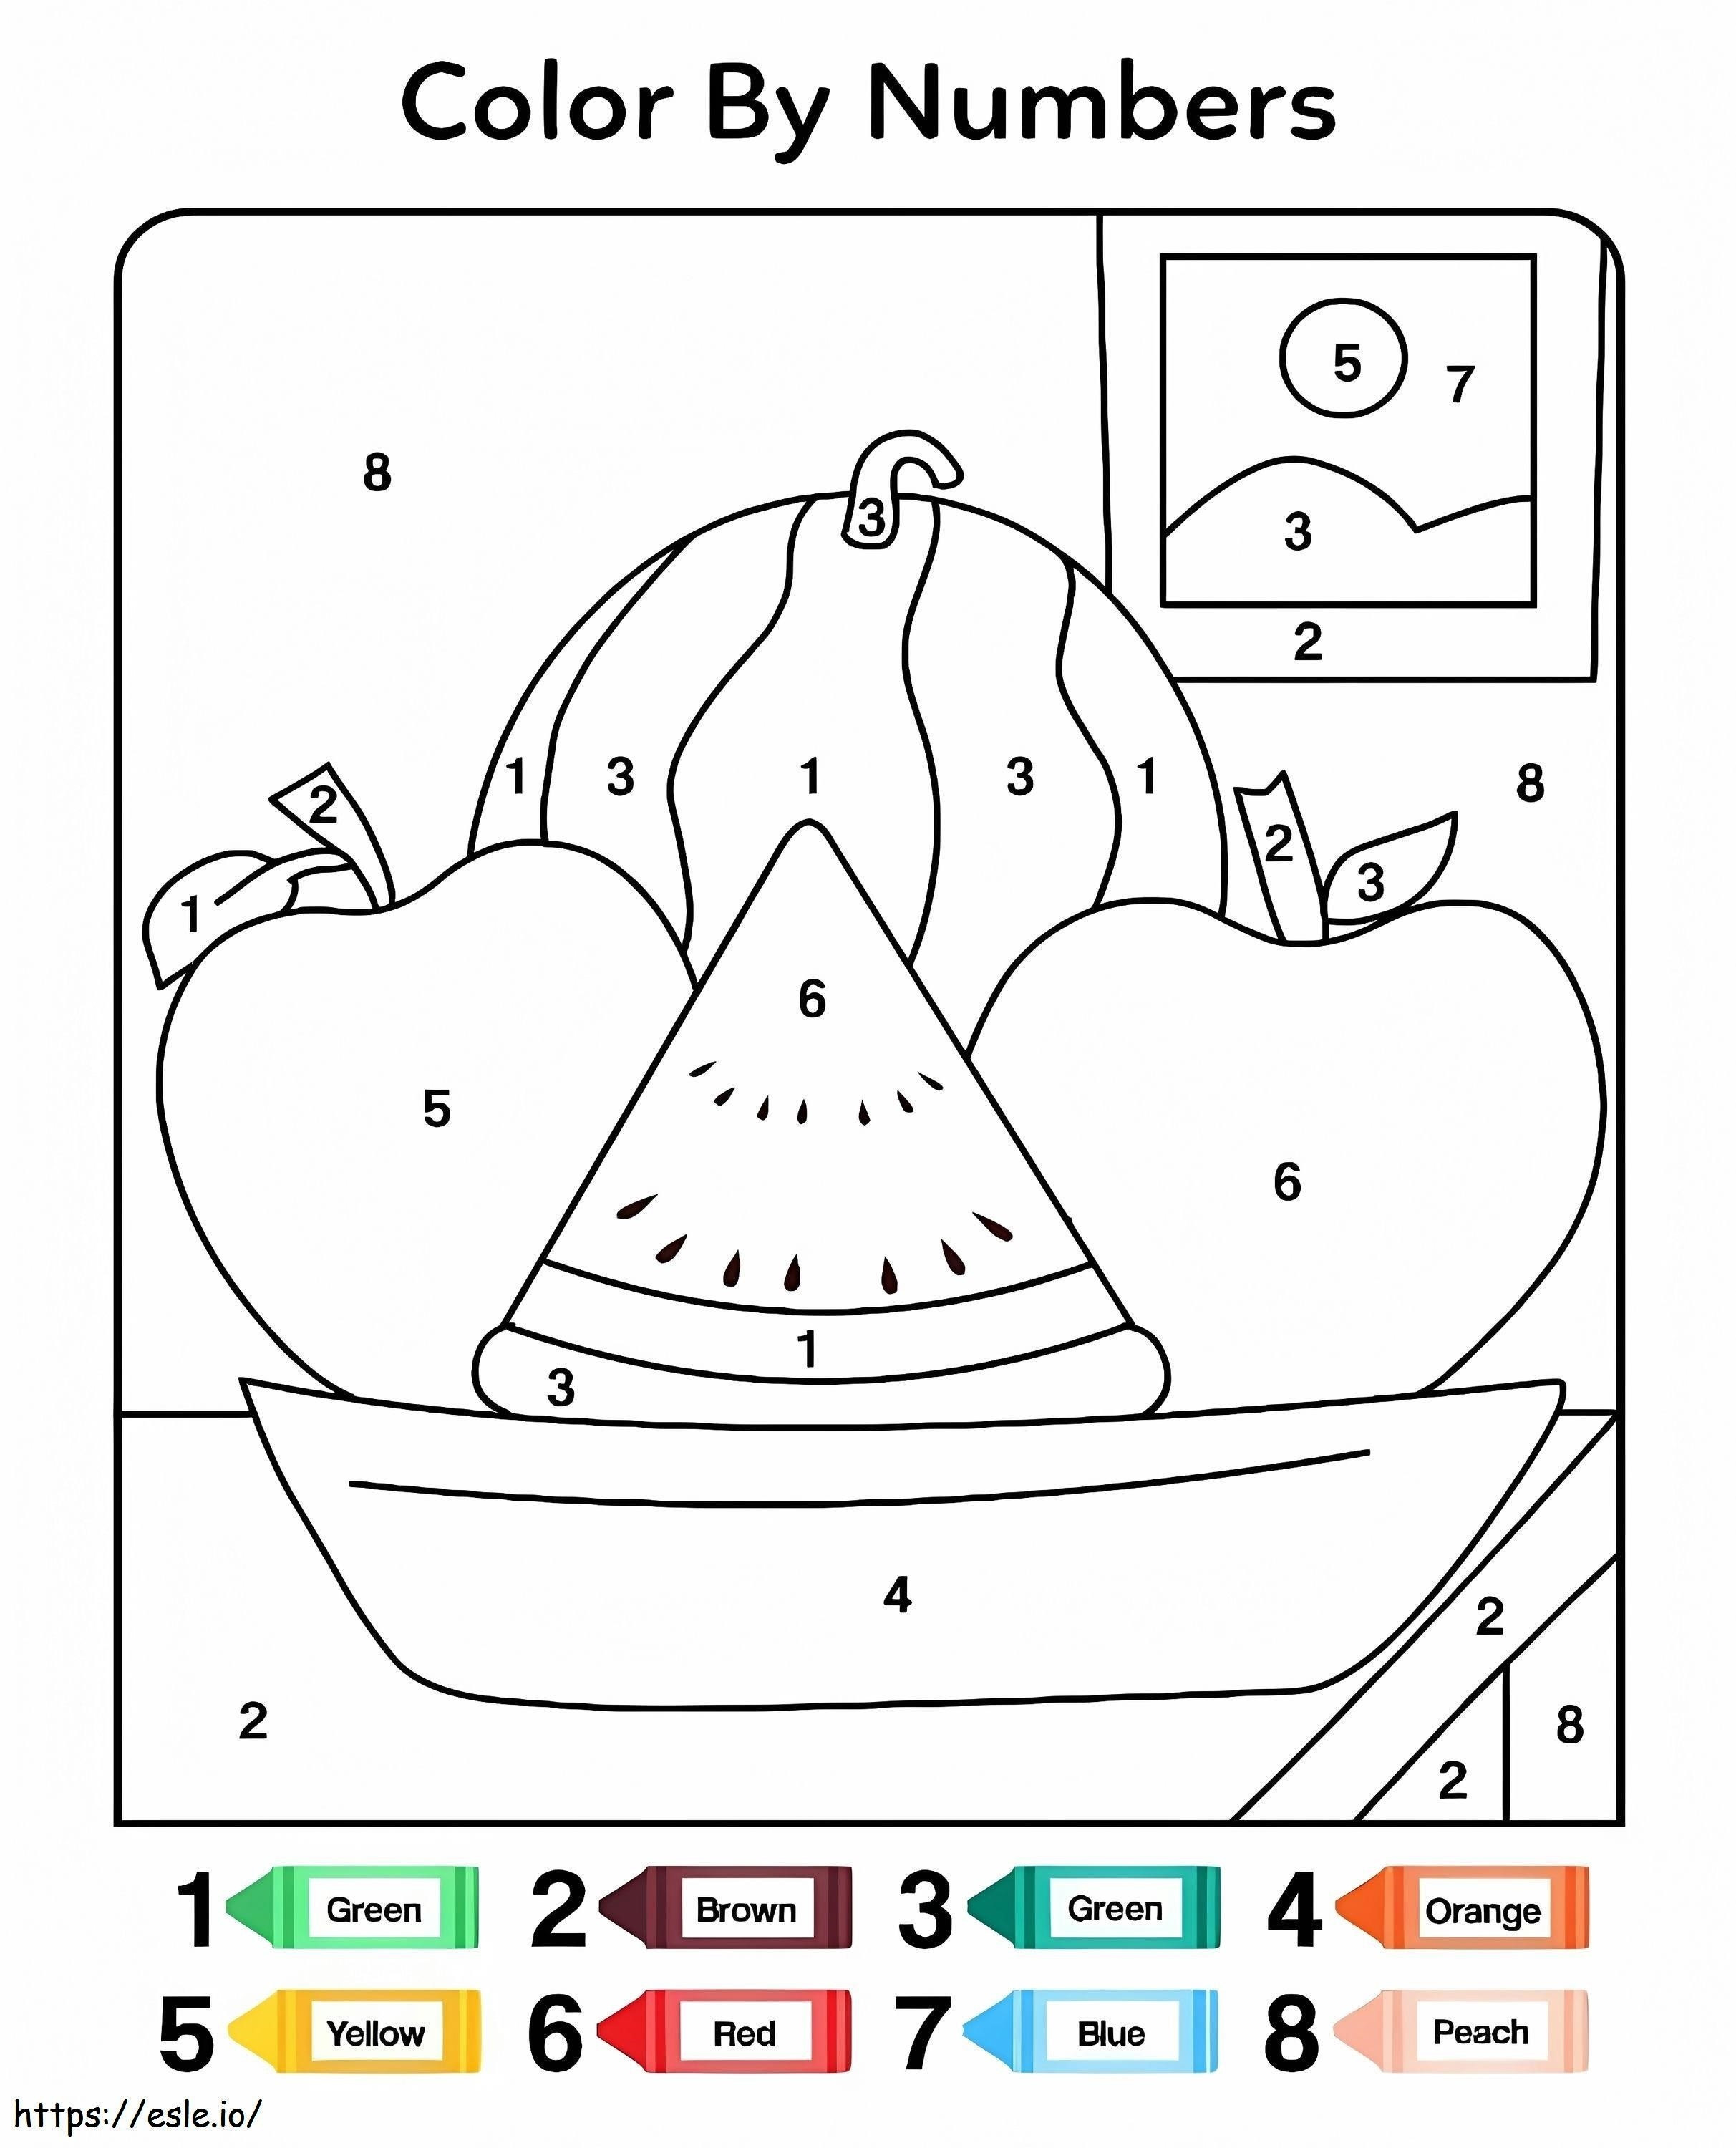 Simple Fruits Color By Number coloring page